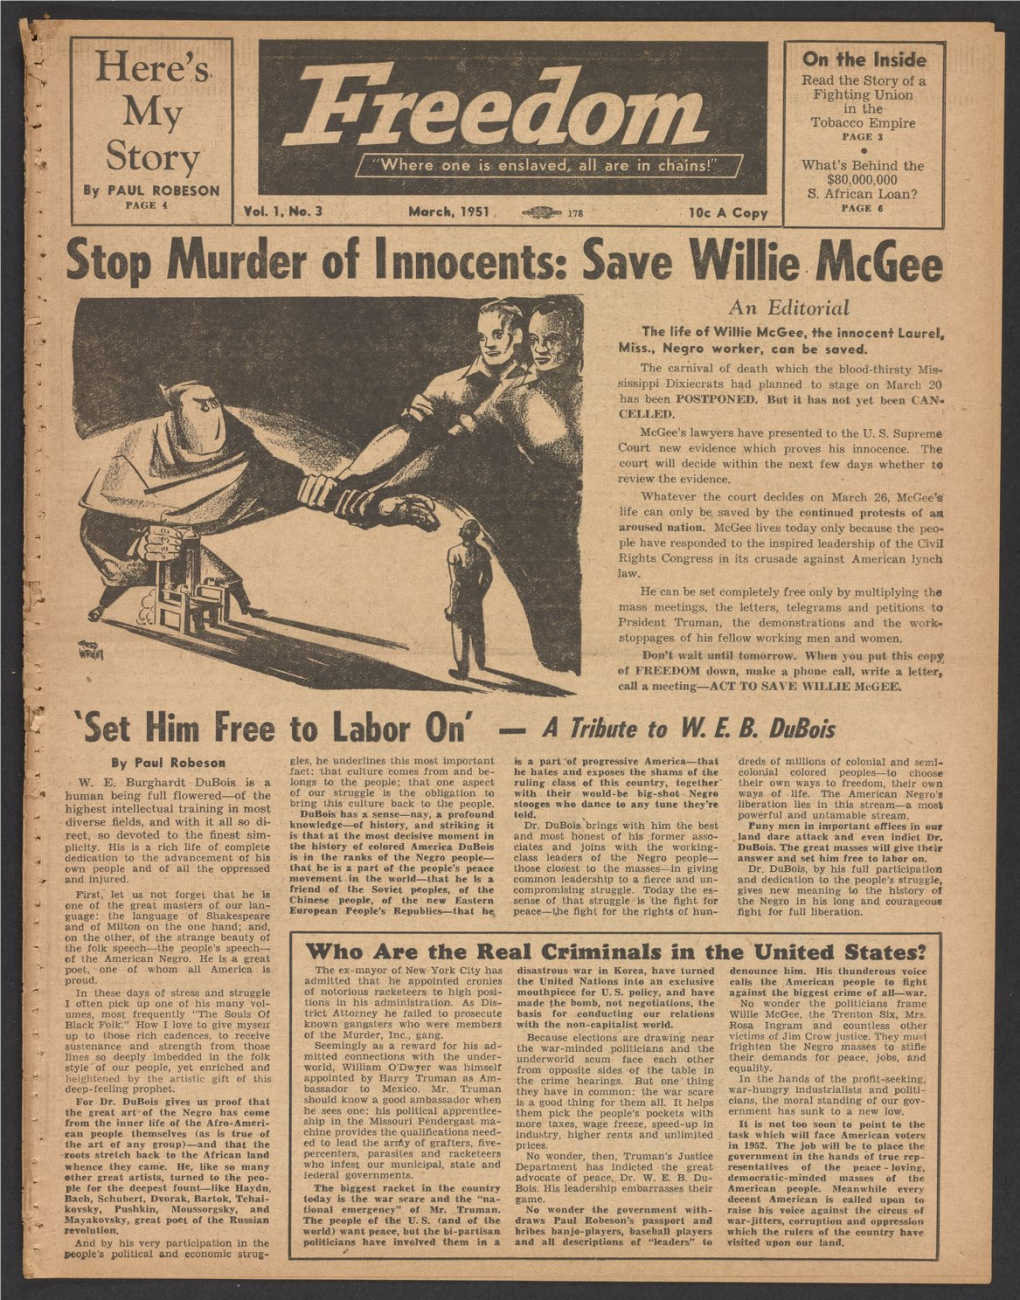 Top Murder of Innocents: Save Willie Mcgee an Editorial the Life of Willie Mcgee, the Innocent Laurel, Miss